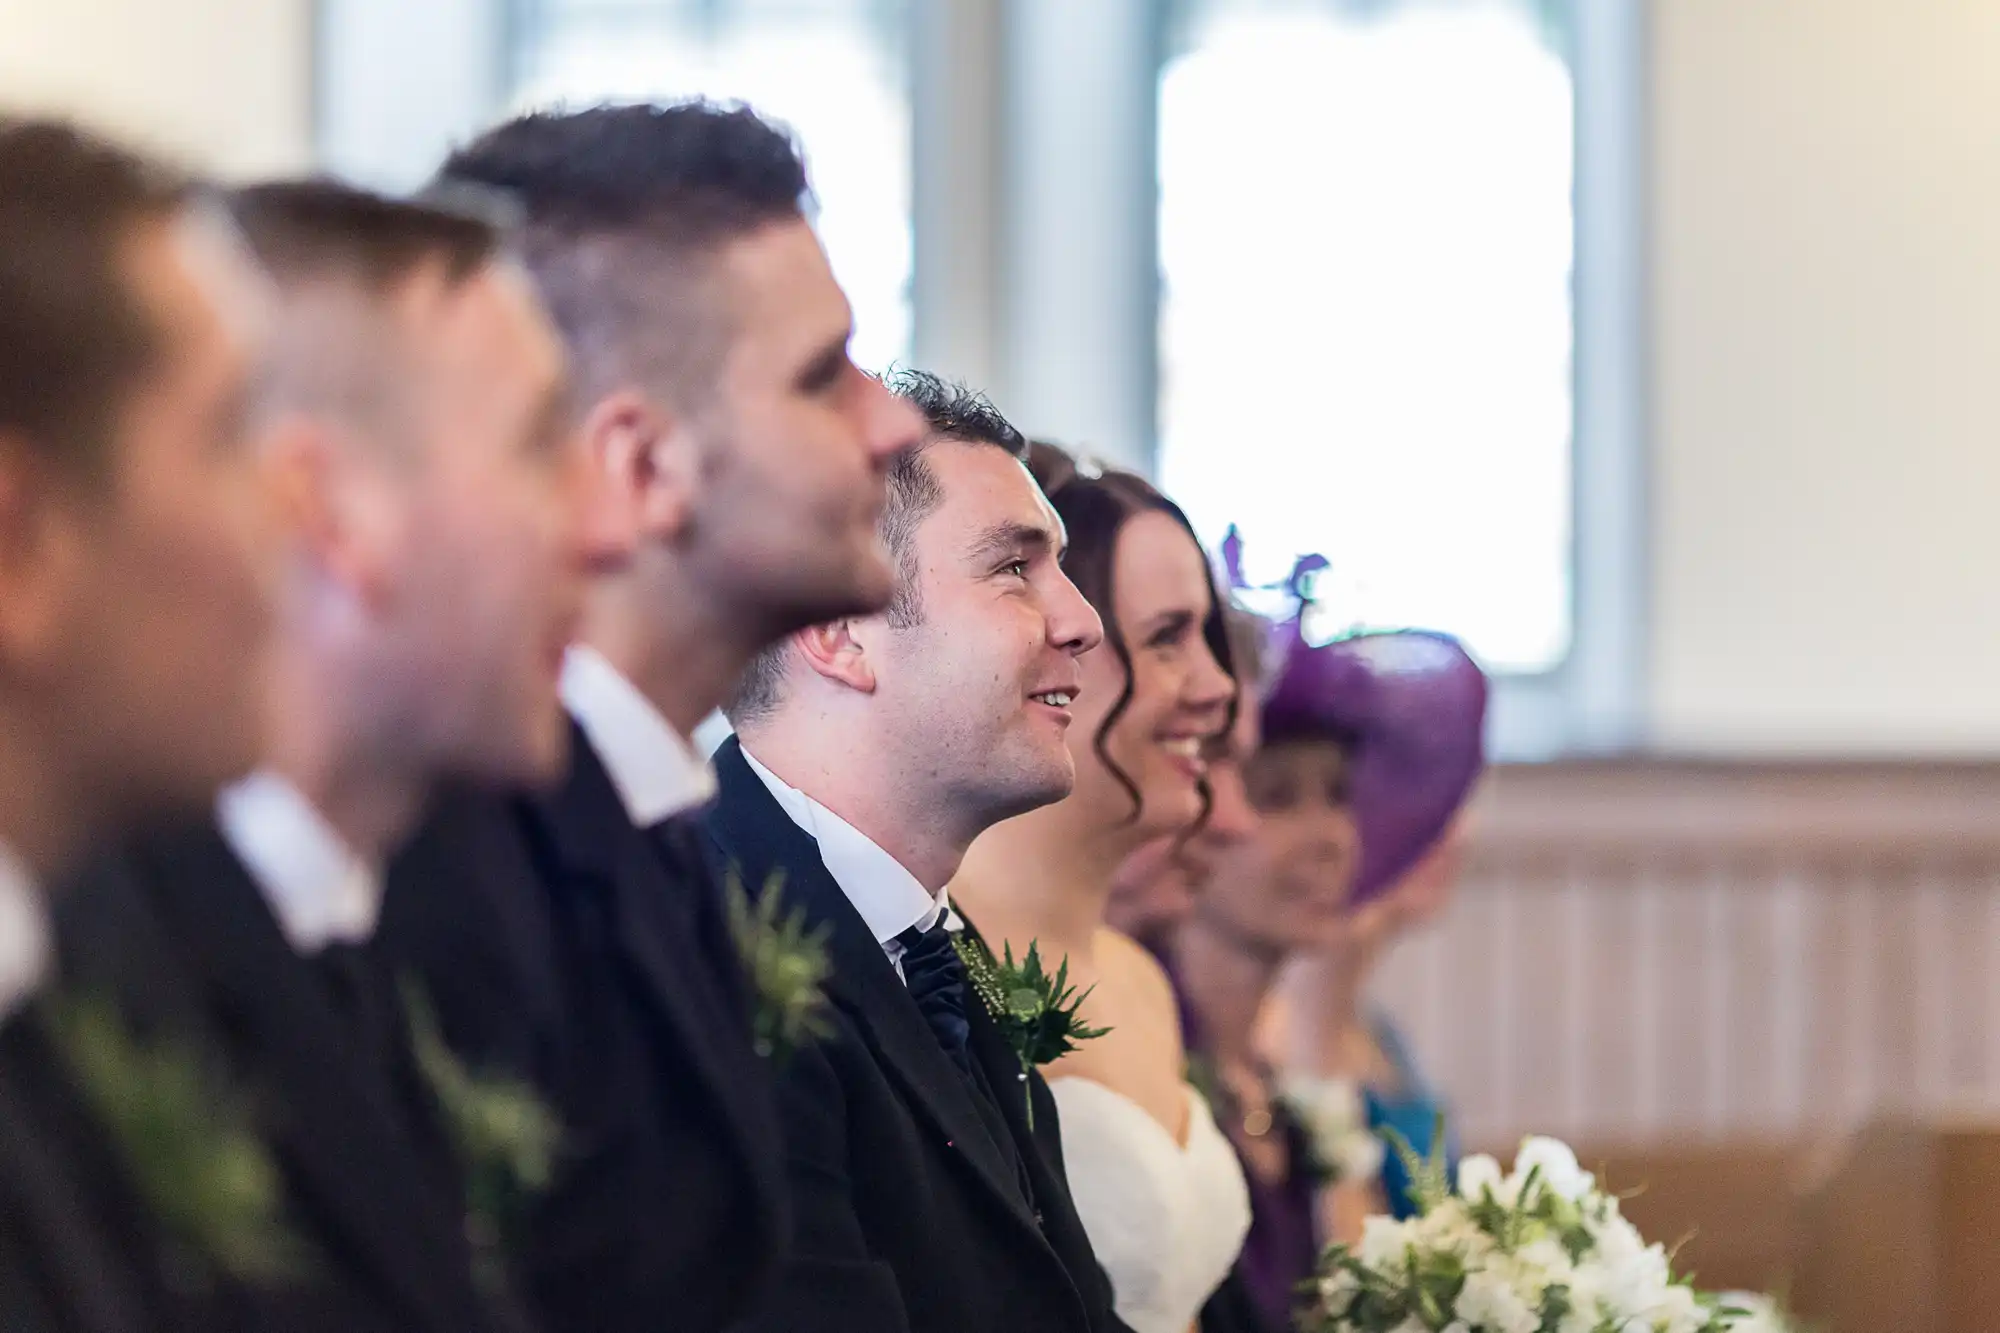 Guests in formal attire, smiling and focused on an event off-camera in a church setting.